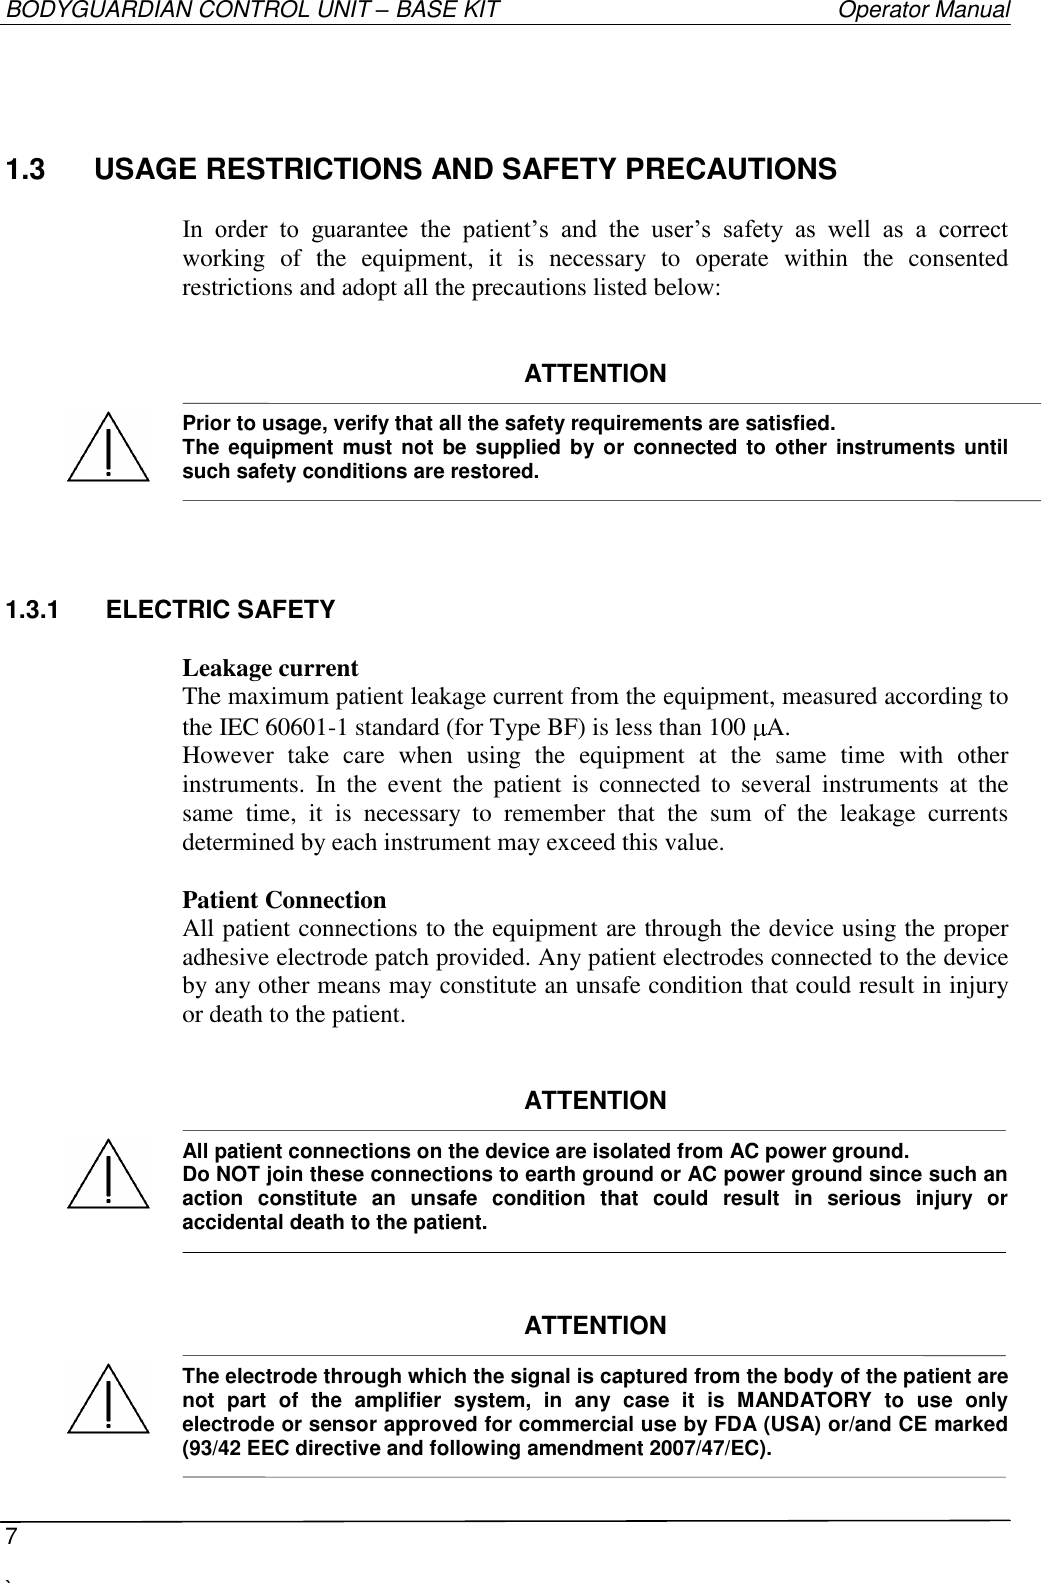 BODYGUARDIAN CONTROL UNIT – BASE KIT   Operator Manual  7  `   1.3  USAGE RESTRICTIONS AND SAFETY PRECAUTIONS  In  order  to  guarantee  the  patient’s  and  the  user’s  safety  as  well  as  a  correct working  of  the  equipment,  it  is  necessary  to  operate  within  the  consented restrictions and adopt all the precautions listed below:   ATTENTION  Prior to usage, verify that all the safety requirements are satisfied. The  equipment must  not be supplied  by or  connected  to  other instruments until such safety conditions are restored.  1.3.1  ELECTRIC SAFETY  Leakage current The maximum patient leakage current from the equipment, measured according to the IEC 60601-1 standard (for Type BF) is less than 100  A. However  take  care  when  using  the  equipment  at  the  same  time  with  other instruments.  In  the  event  the  patient  is  connected  to  several instruments  at  the same  time,  it  is  necessary  to  remember  that  the  sum  of  the  leakage  currents determined by each instrument may exceed this value.  Patient Connection All patient connections to the equipment are through the device using the proper adhesive electrode patch provided. Any patient electrodes connected to the device by any other means may constitute an unsafe condition that could result in injury or death to the patient.   ATTENTION  All patient connections on the device are isolated from AC power ground. Do NOT join these connections to earth ground or AC power ground since such an action  constitute  an  unsafe  condition  that  could  result  in  serious  injury  or accidental death to the patient.    ATTENTION  The electrode through which the signal is captured from the body of the patient are not  part  of  the  amplifier  system,  in  any  case  it  is  MANDATORY  to  use  only electrode or sensor approved for commercial use by FDA (USA) or/and CE marked (93/42 EEC directive and following amendment 2007/47/EC).      